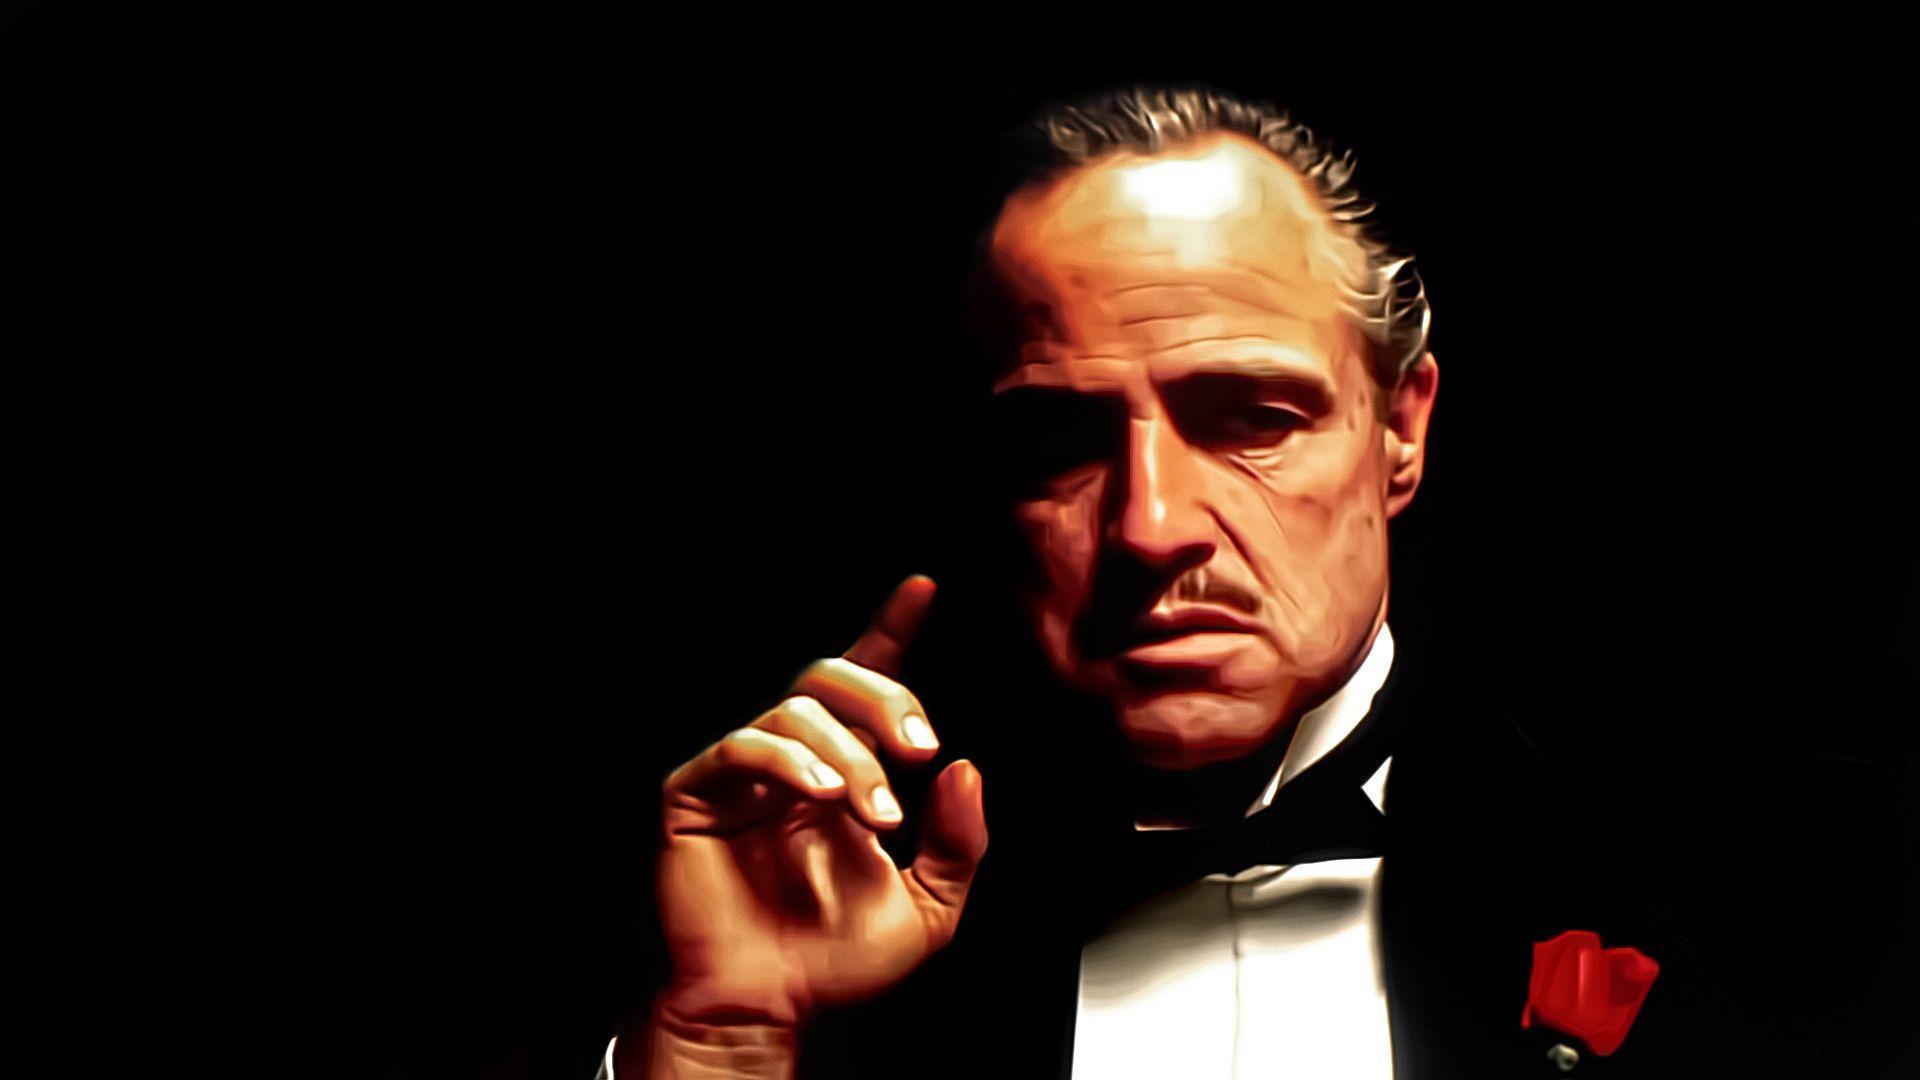 HD wallpaper The Godfather  Wallpaper Flare